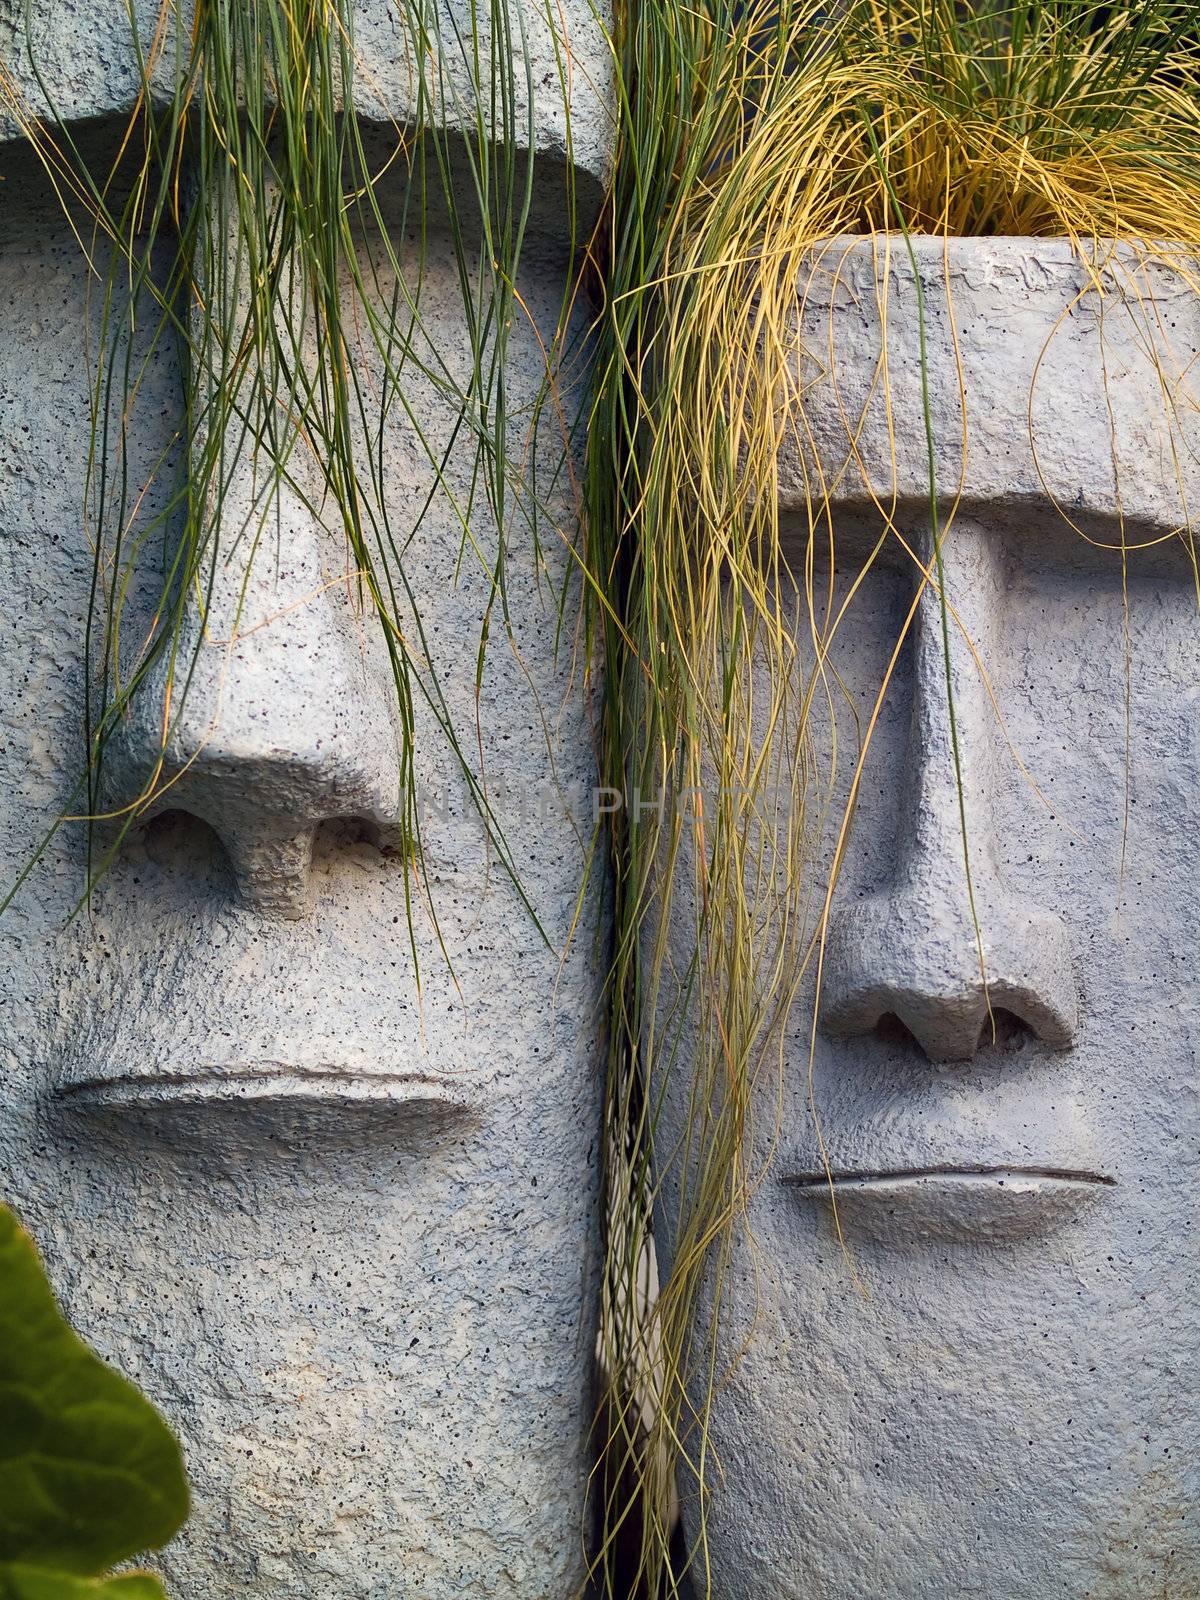 Easter Island planters with long grean and yellow grass hair